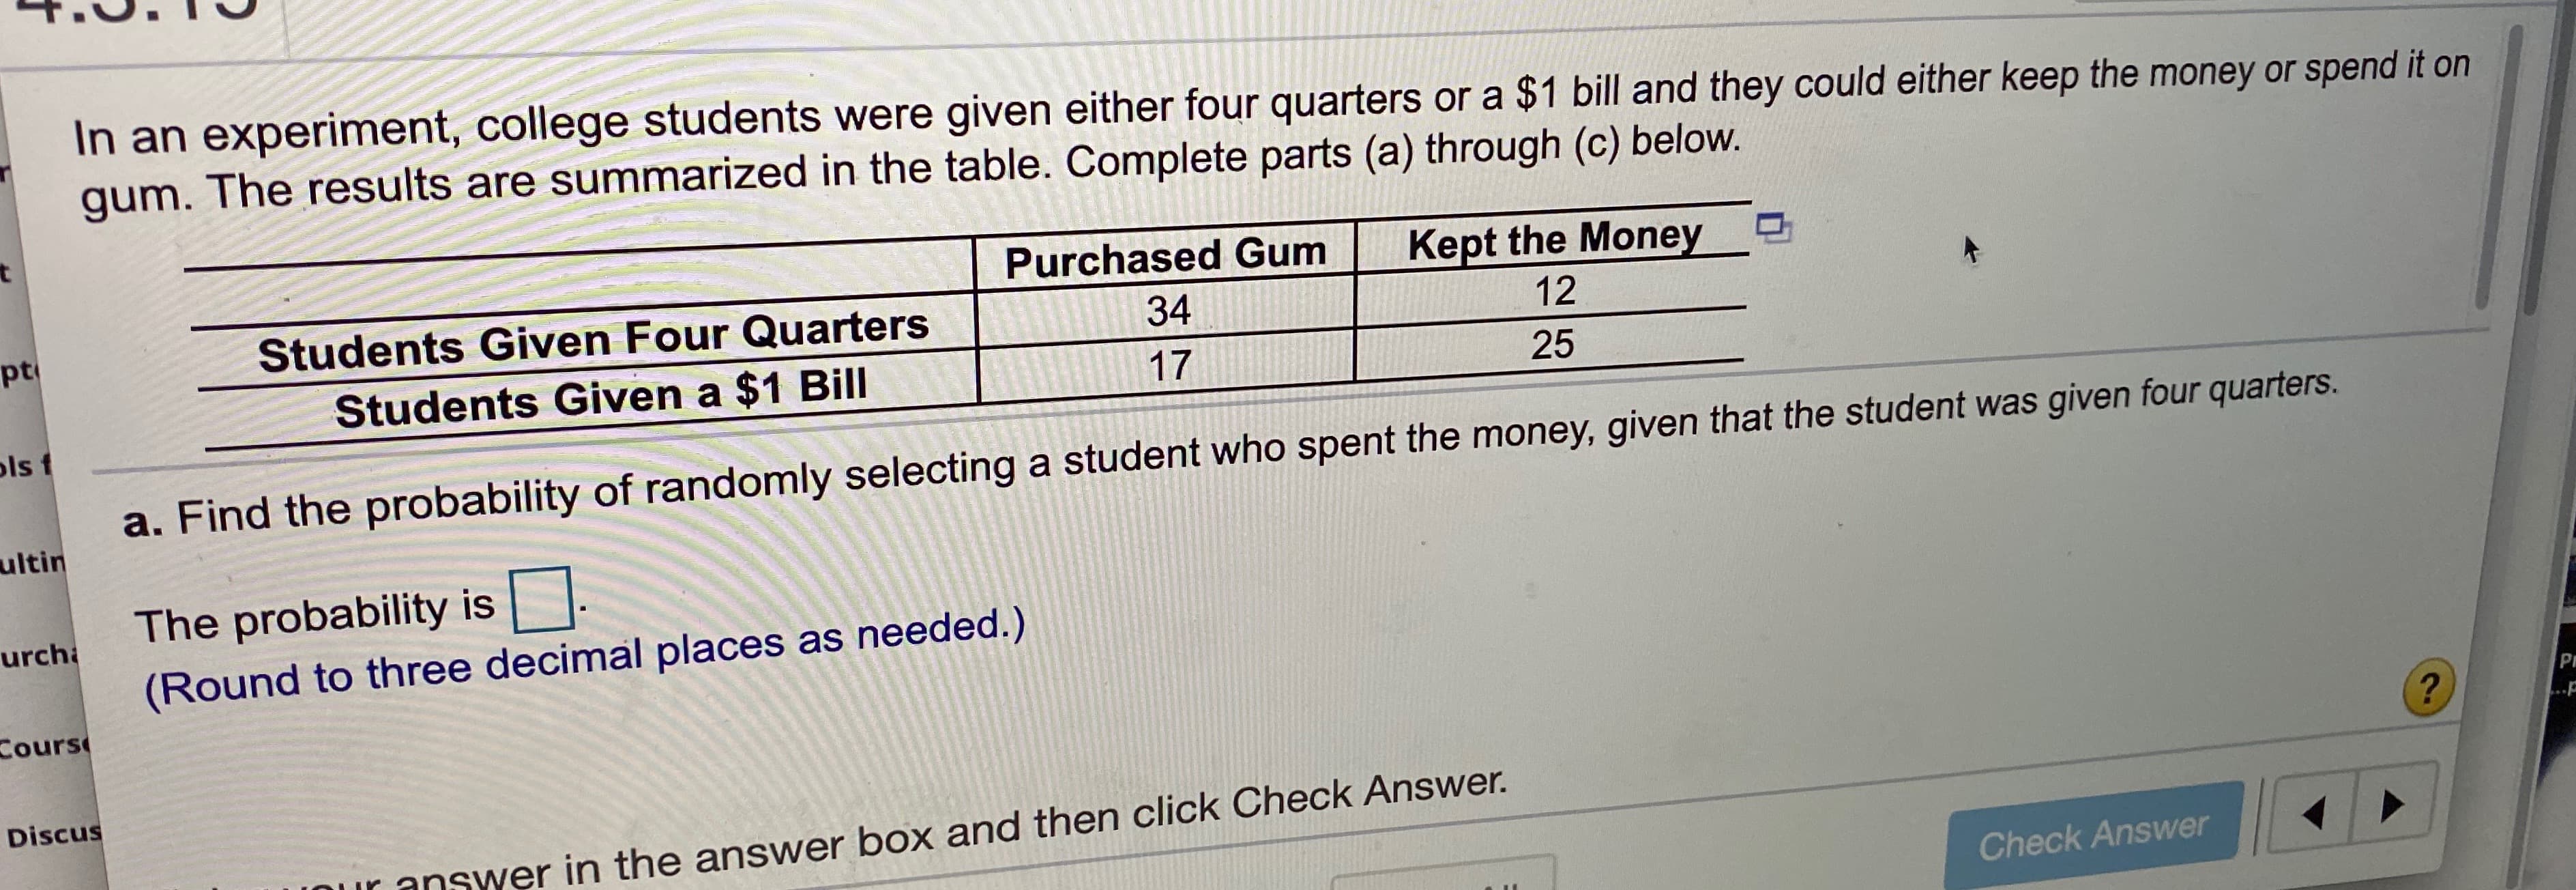 In an experiment, college students were given either four quarters or a $1 bill and they could either keep the money or spend it on
gum. The results are summarized in the table. Complete parts (a) through (c) below.
Purchased Gum
Kept the Money
pt
Students Given Four Quarters
34
12
Students Given a $1 Bill
17
25
ls t
a. Find the probability of randomly selecting a student who spent the money, given that the student was given four quarters.
ultin
The probability is
urcha
(Round to three decimal places as needed.)
Cours
Discus
CuK answer in the answer box and then click Check Answer.
Check Answer
